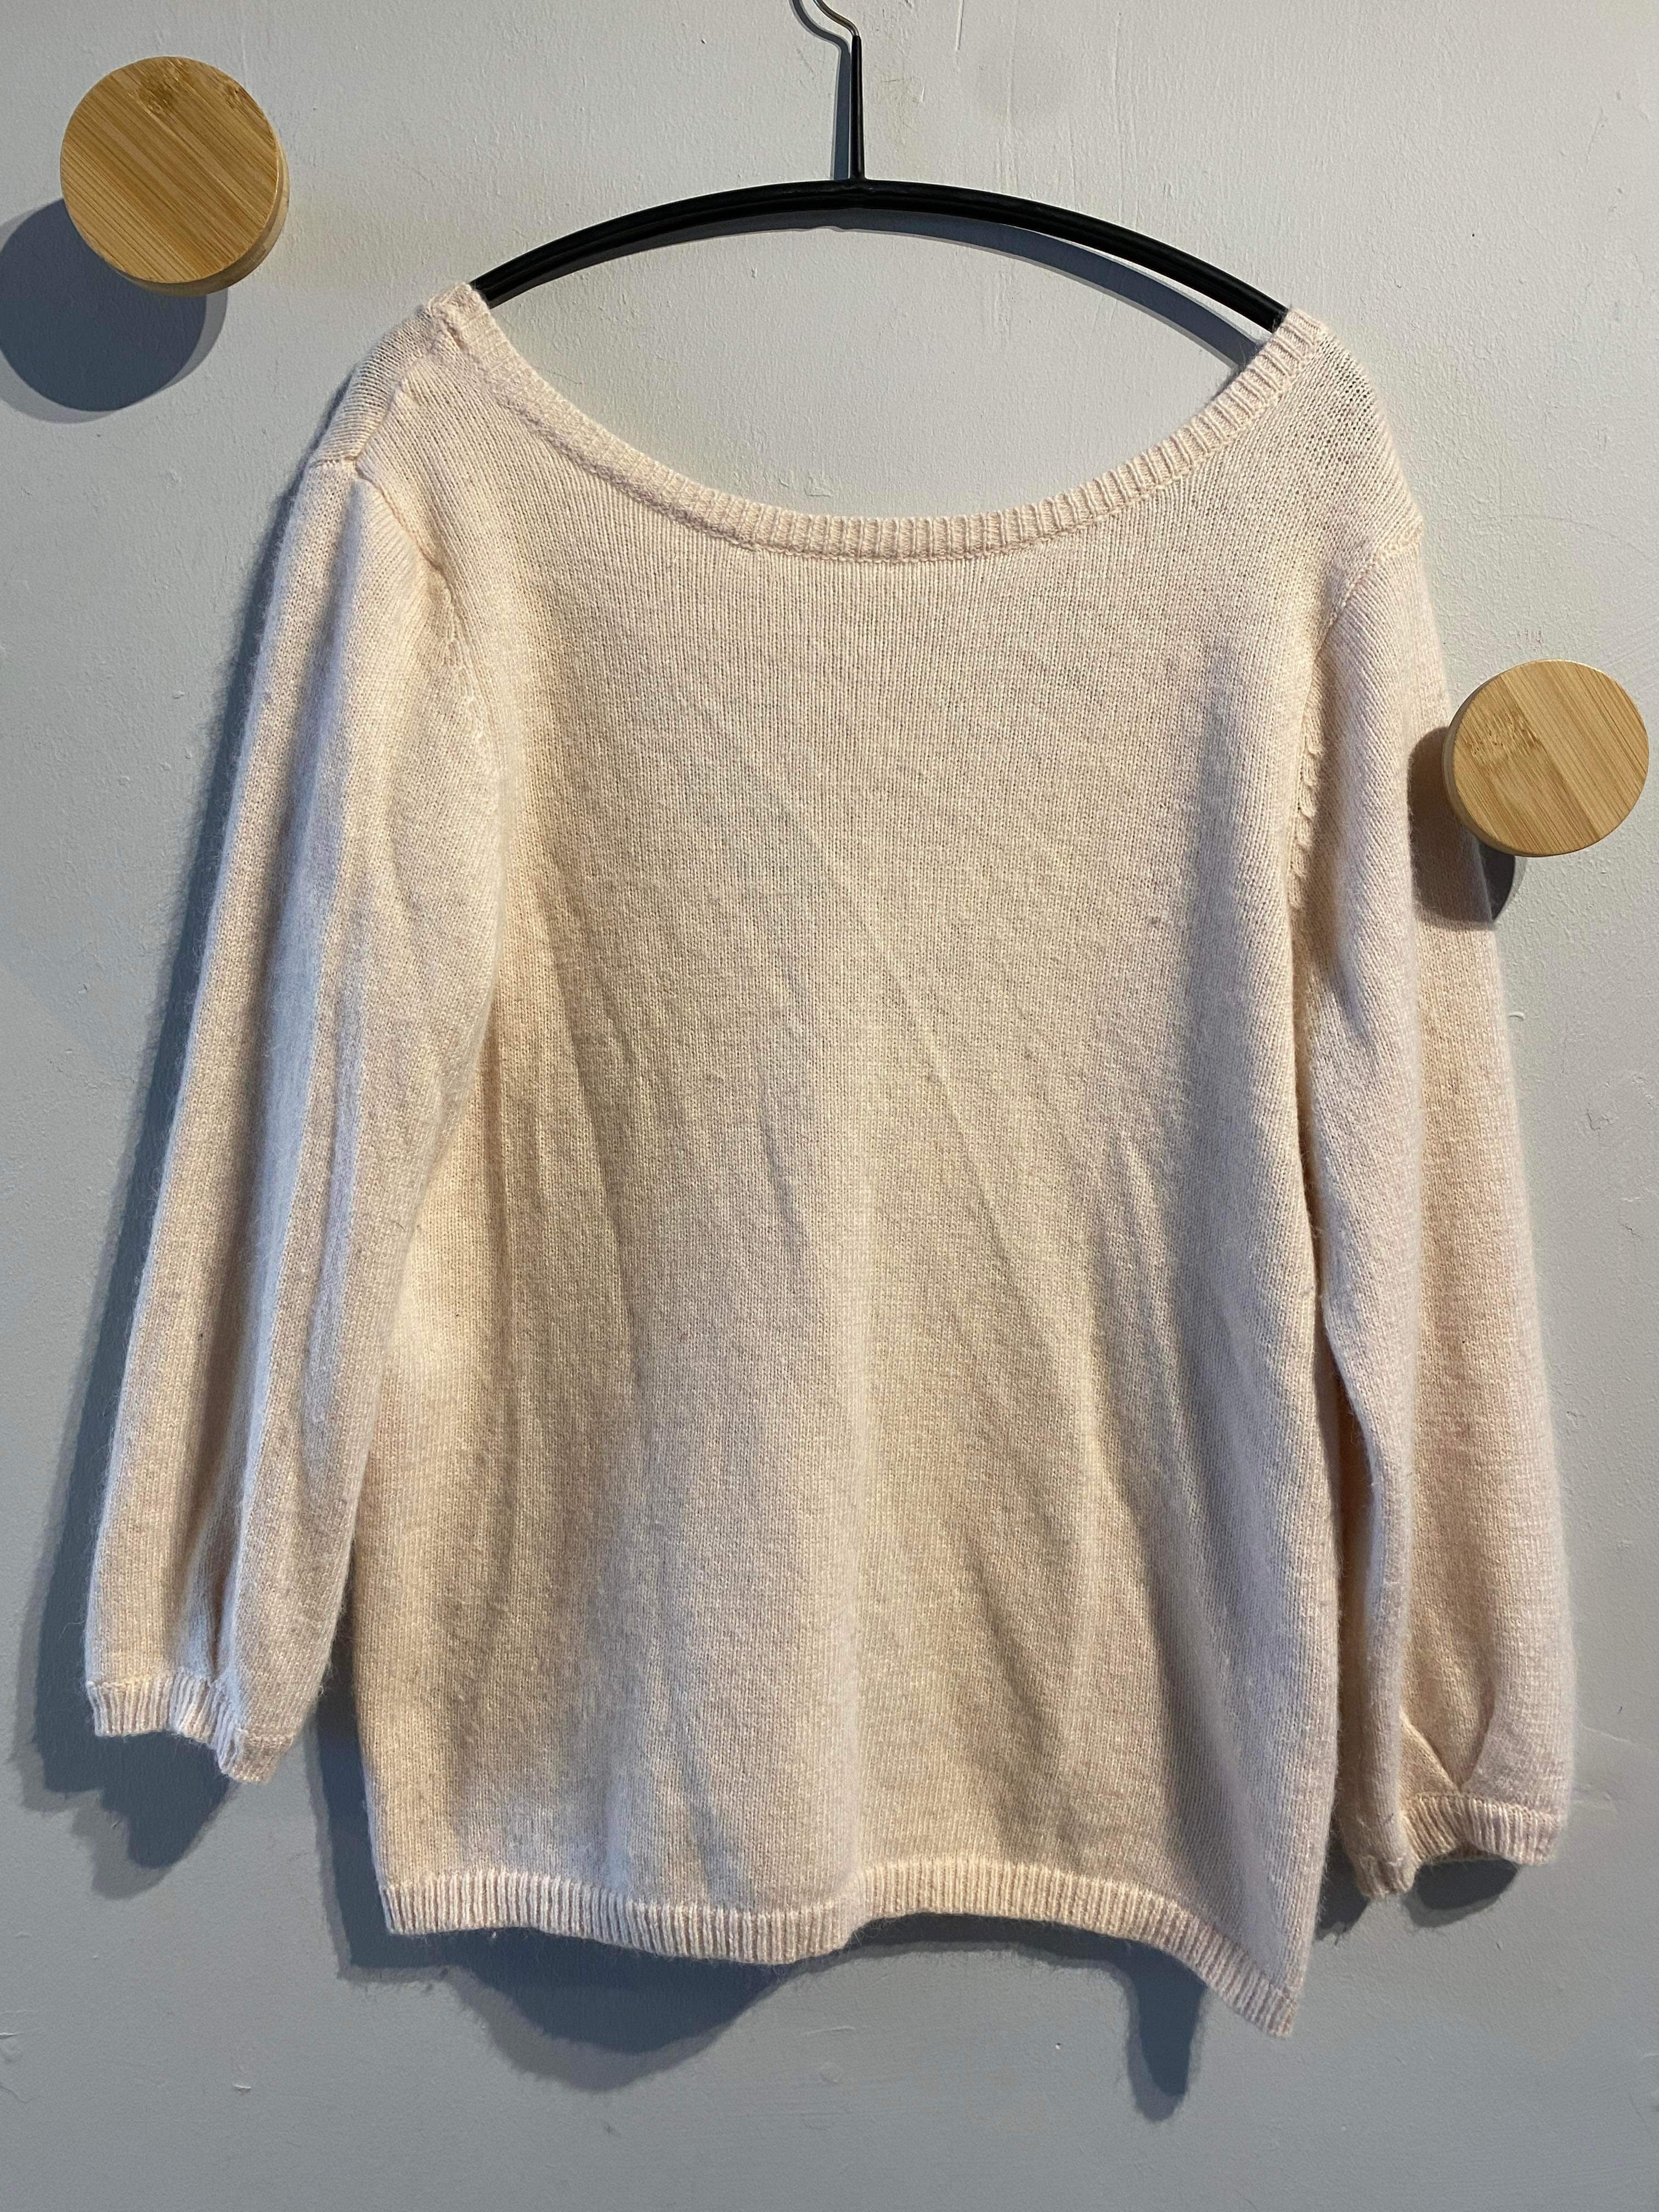 Selected Femme - Sweater - Size: XS